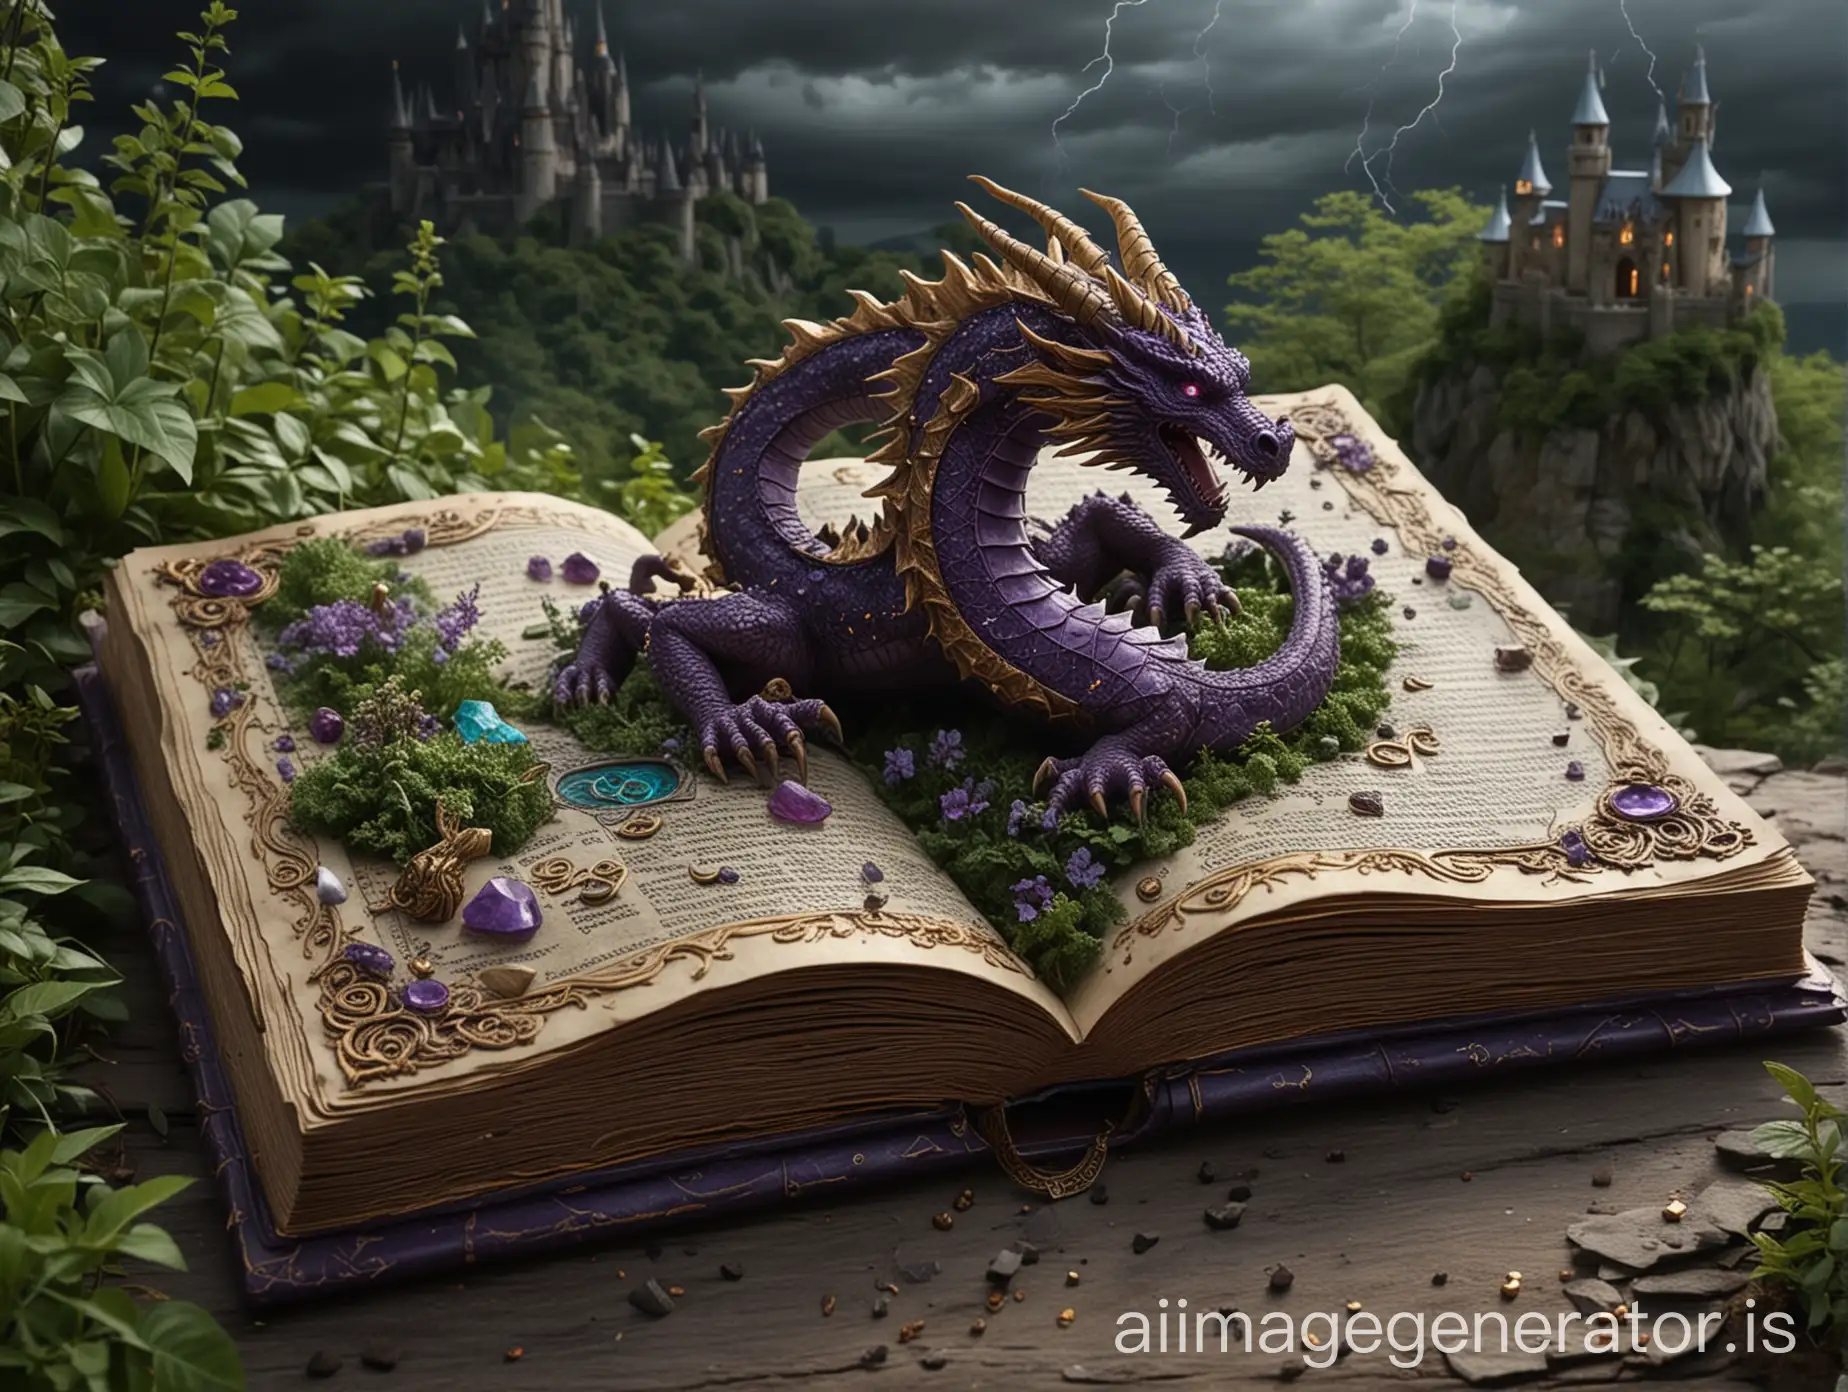 A 3D fantasy grimoire pop-up book page opens, revealing in 3D out of book an ancient dragon born on a mountain of gold and gems amidst lush greenery and ruined castle architecture. The dragon's ethereal, transparent skin glistens with glowing purple and black scales, adorned with intricate magic runes and glyphs. Its eyes burn with an inner wisdom, radiating an aura of power and mysticism. In the distance, a stormy thunderstorm crackles with energy, as if channeling the dragon's elemental might. The spell tome Ancient Grimoire, studded with glowing glyphs, lies open on a pedestal, its pages filled with ancient secrets and forbidden knowledge.